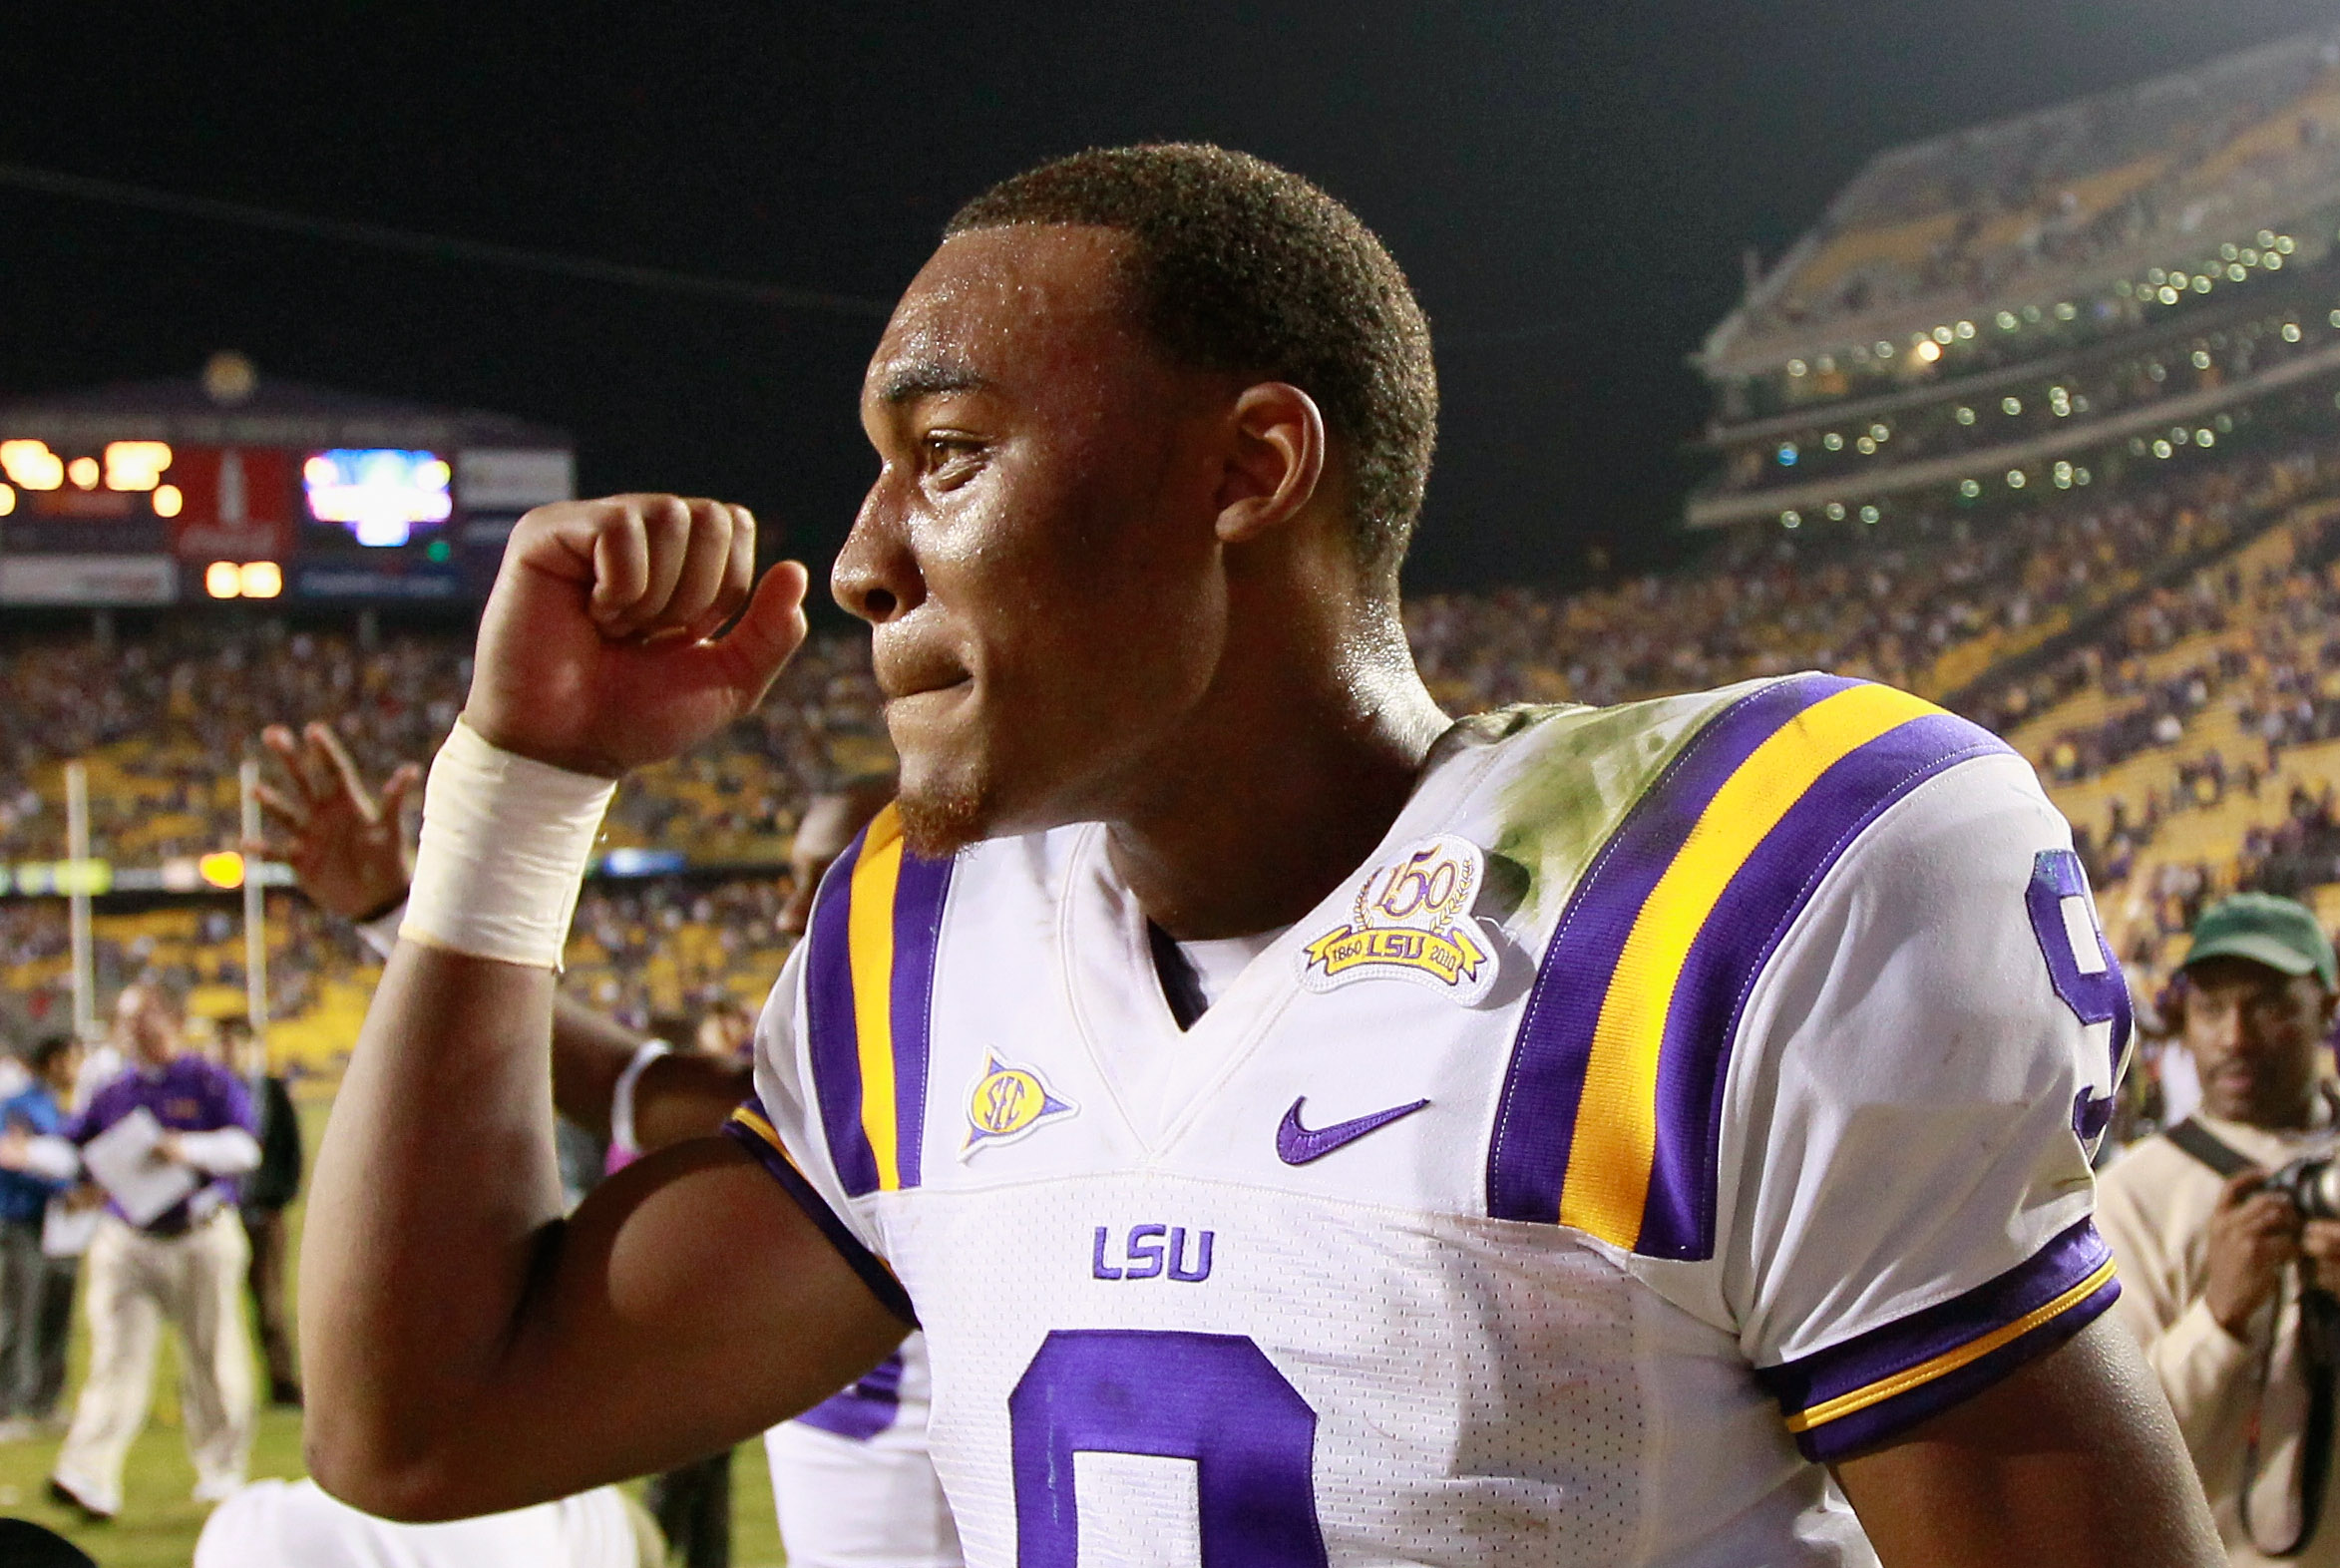 BATON ROUGE, LA - NOVEMBER 20:  Quarterback Jordan Jefferson #9 of the Louisiana State University Tigers reacts after their 43-36 win over the Ole Miss Rebels at Tiger Stadium on November 20, 2010 in Baton Rouge, Louisiana.  (Photo by Kevin C. Cox/Getty I